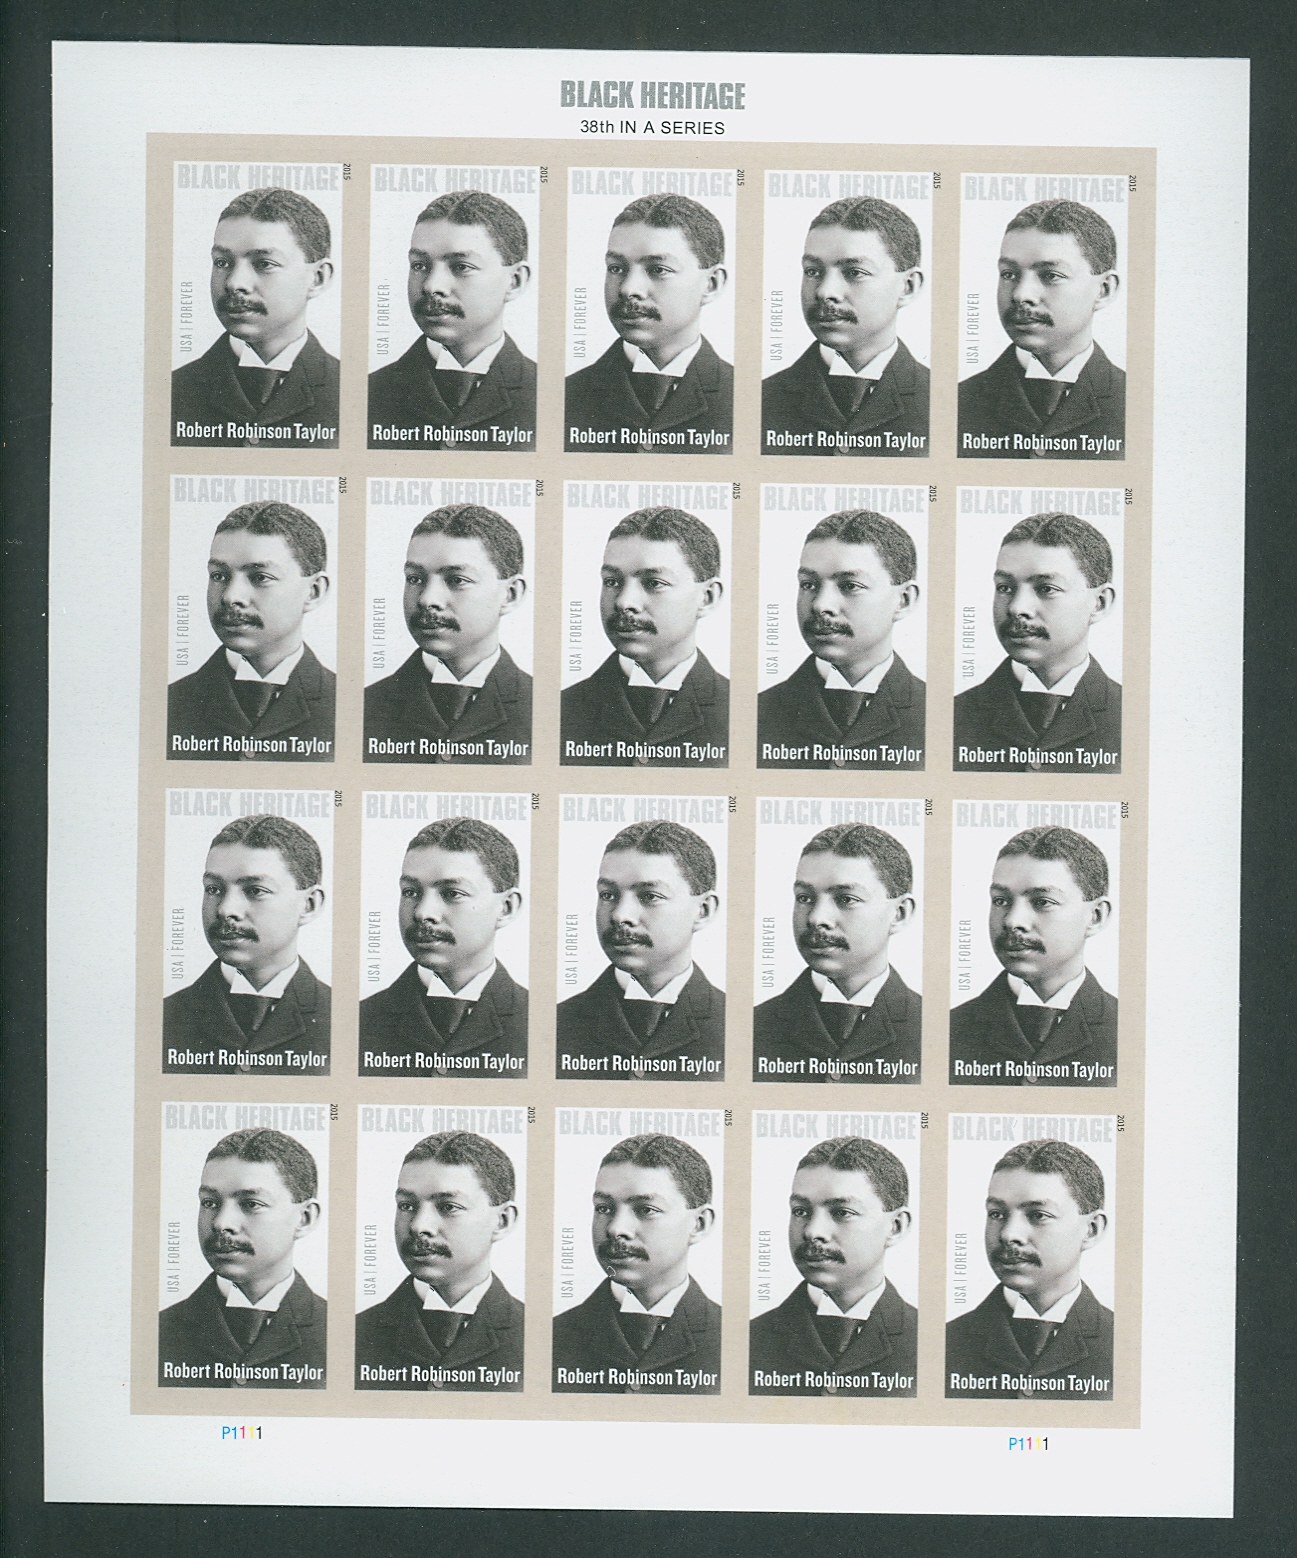 4958i Forever Robert Robinson Taylor Imperf Mint Sheet of 20 #4958ish